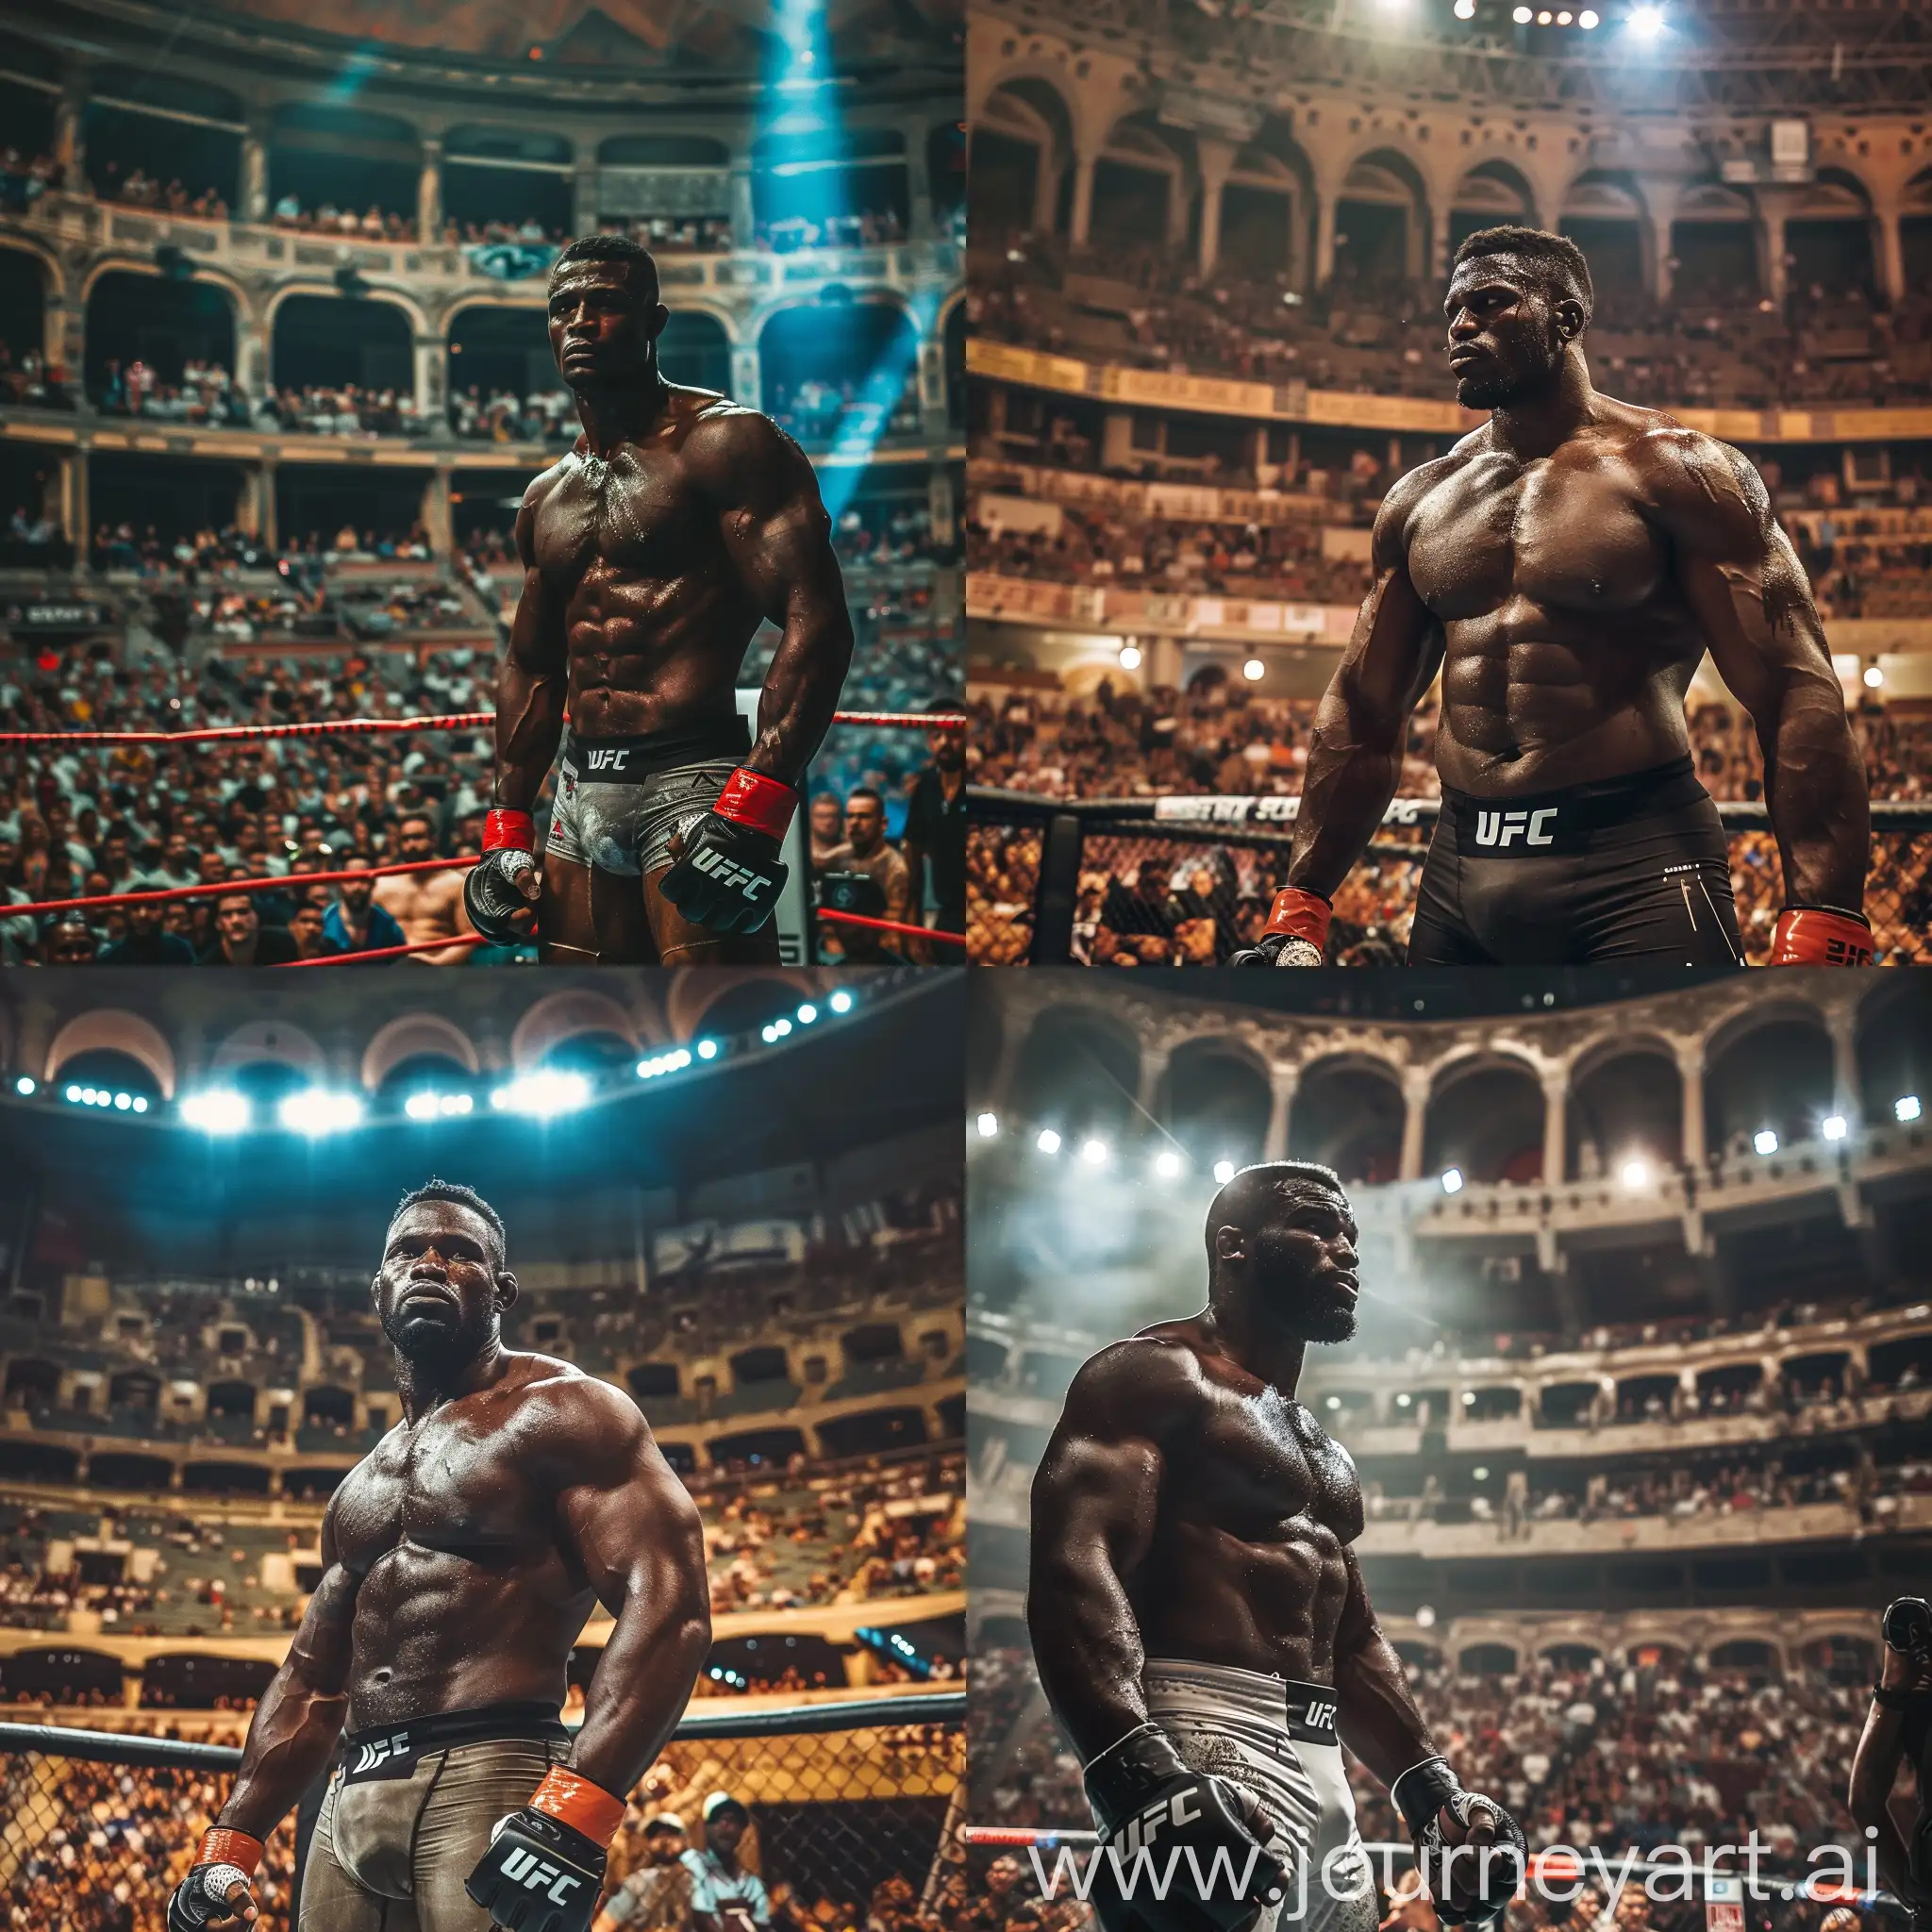 Aesthetic-Black-MMA-Fighter-Dominates-in-Colosseum-Ring